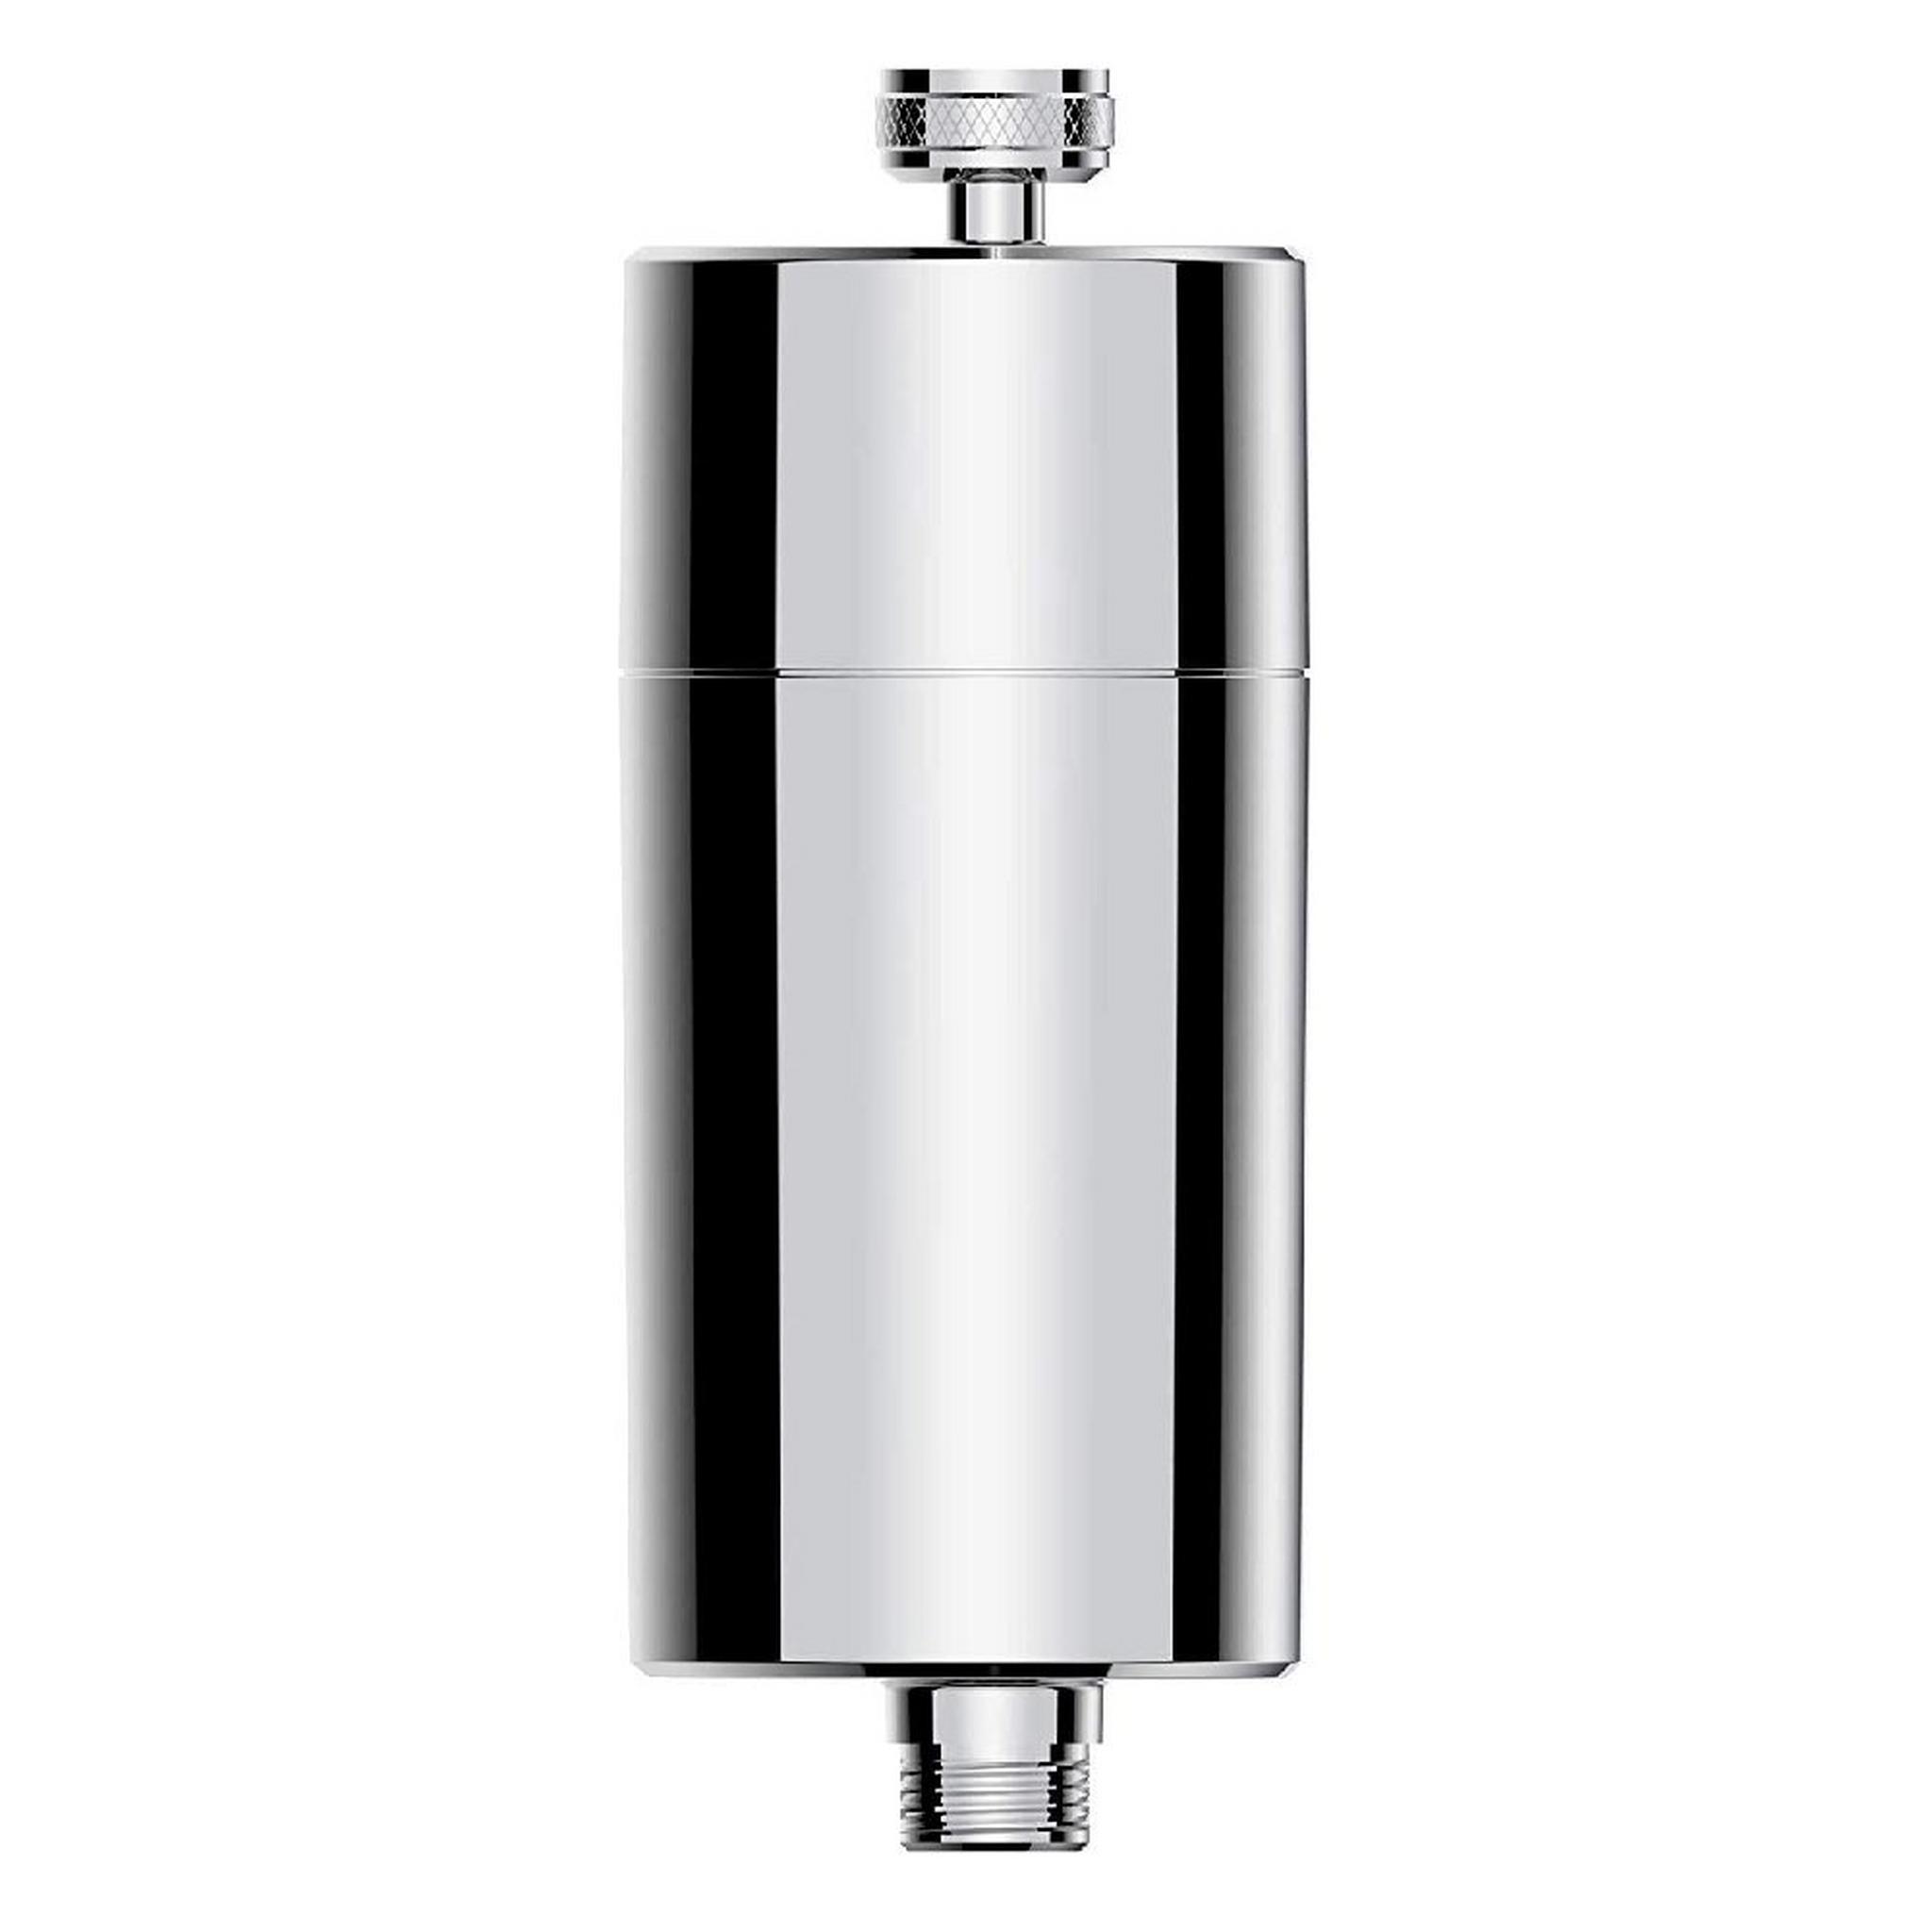 PHILIPS Shower Filter, 50000 Liters, AWP1775CH – Chrome